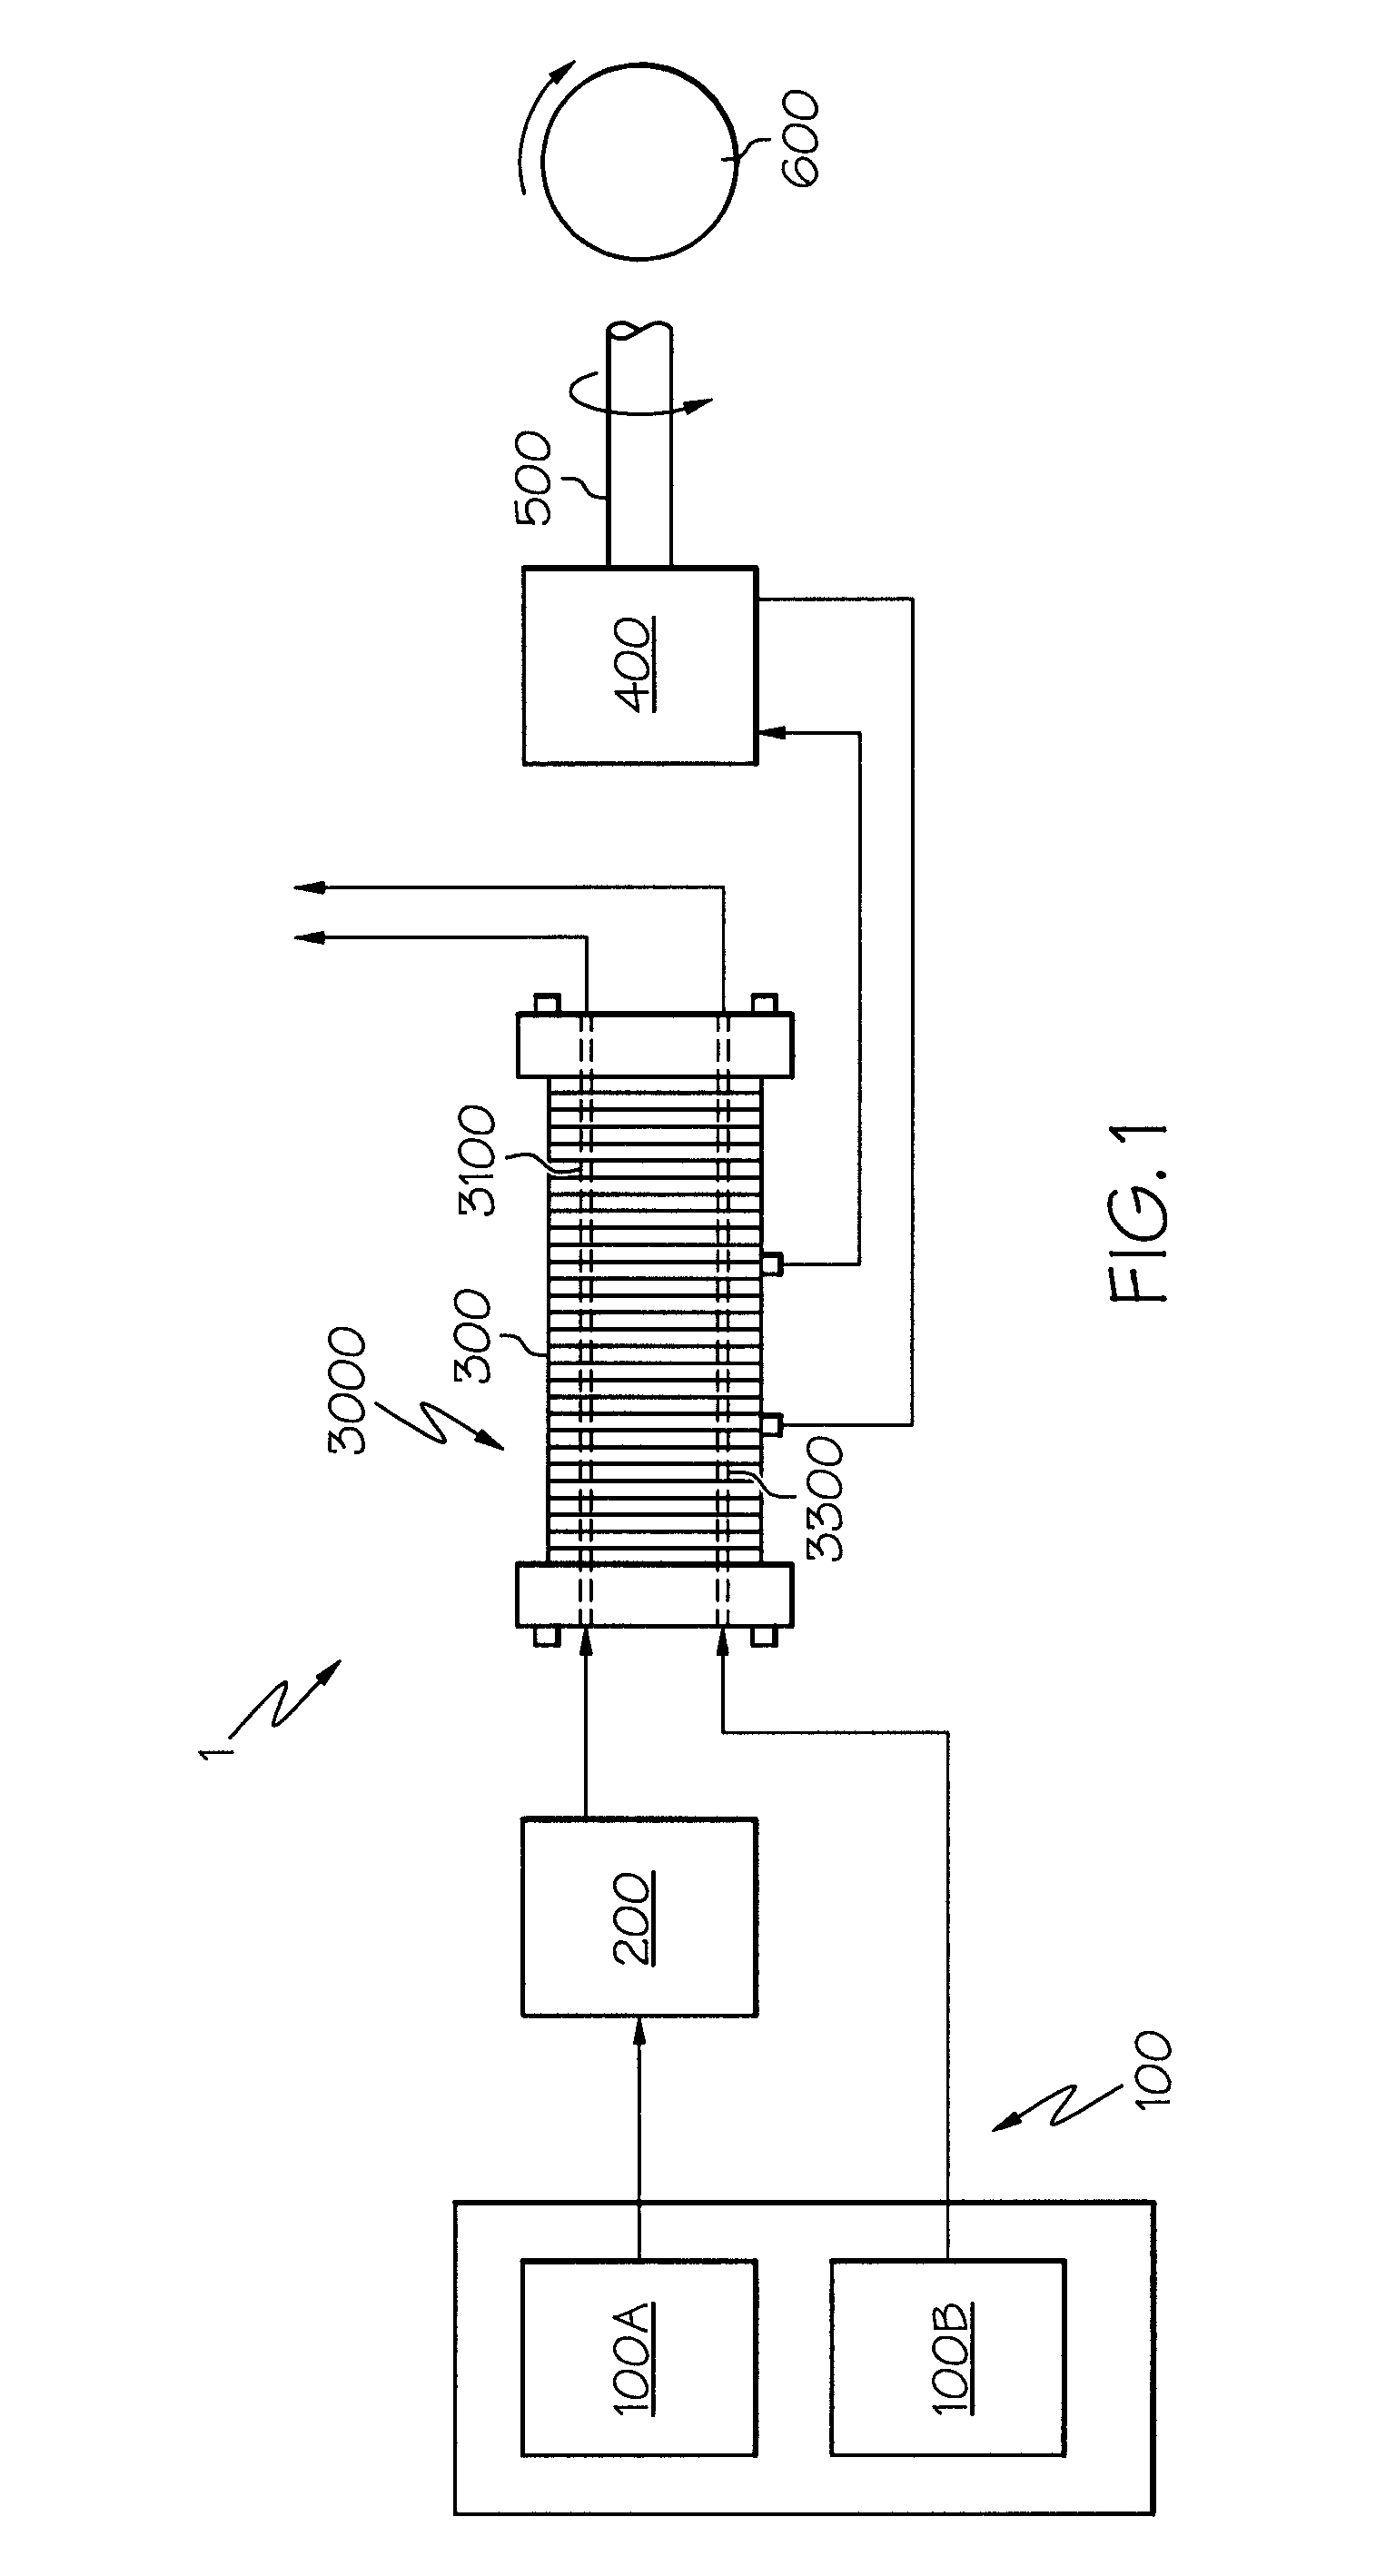 Control of nitrogen fraction in a flow shifting fuel cell system